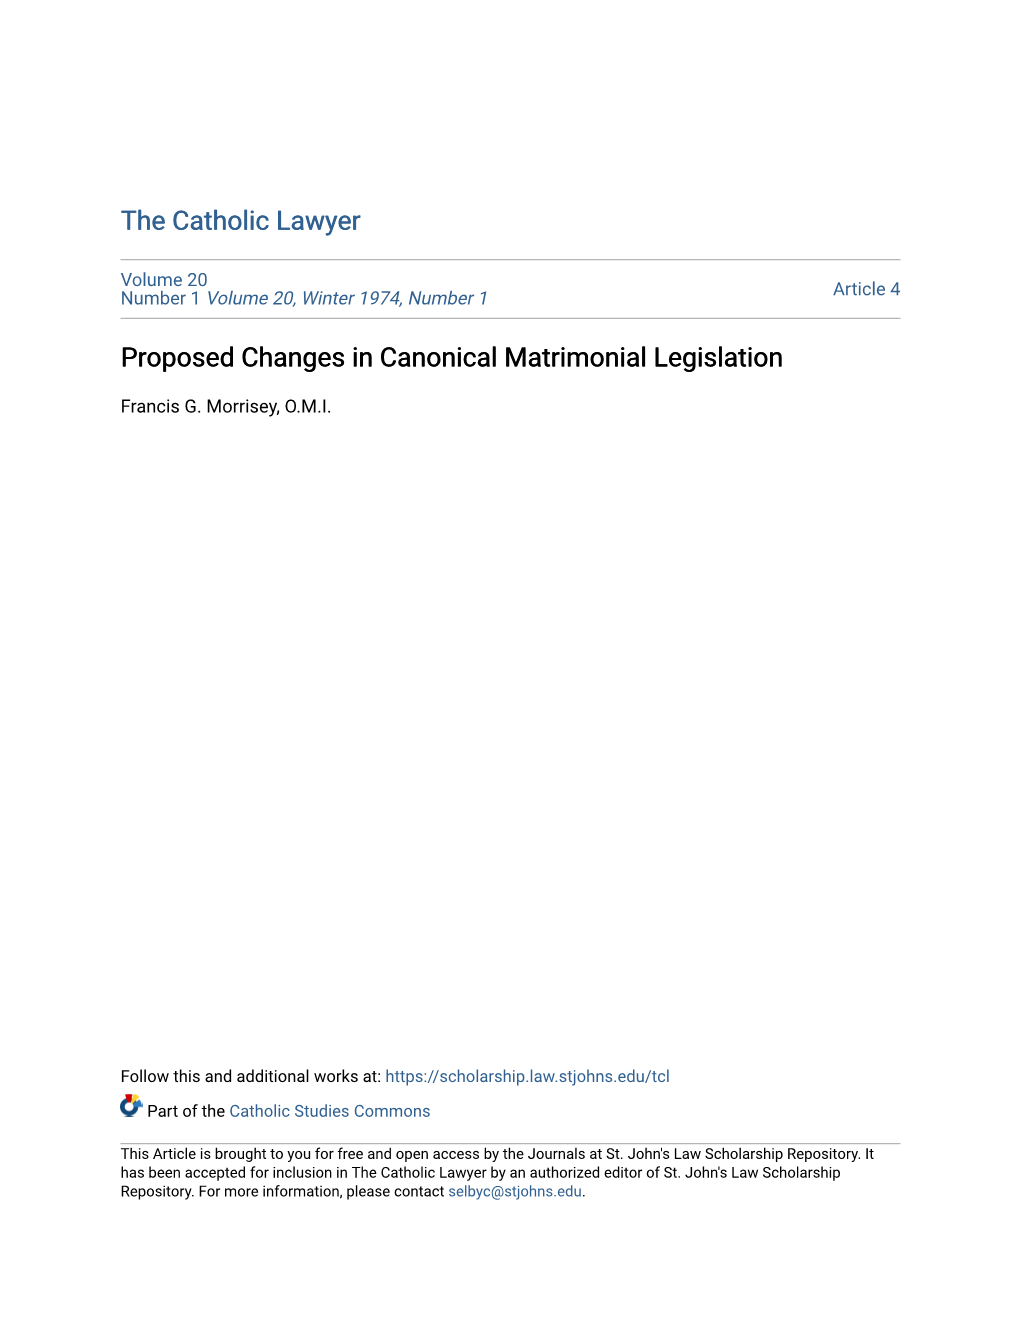 Proposed Changes in Canonical Matrimonial Legislation